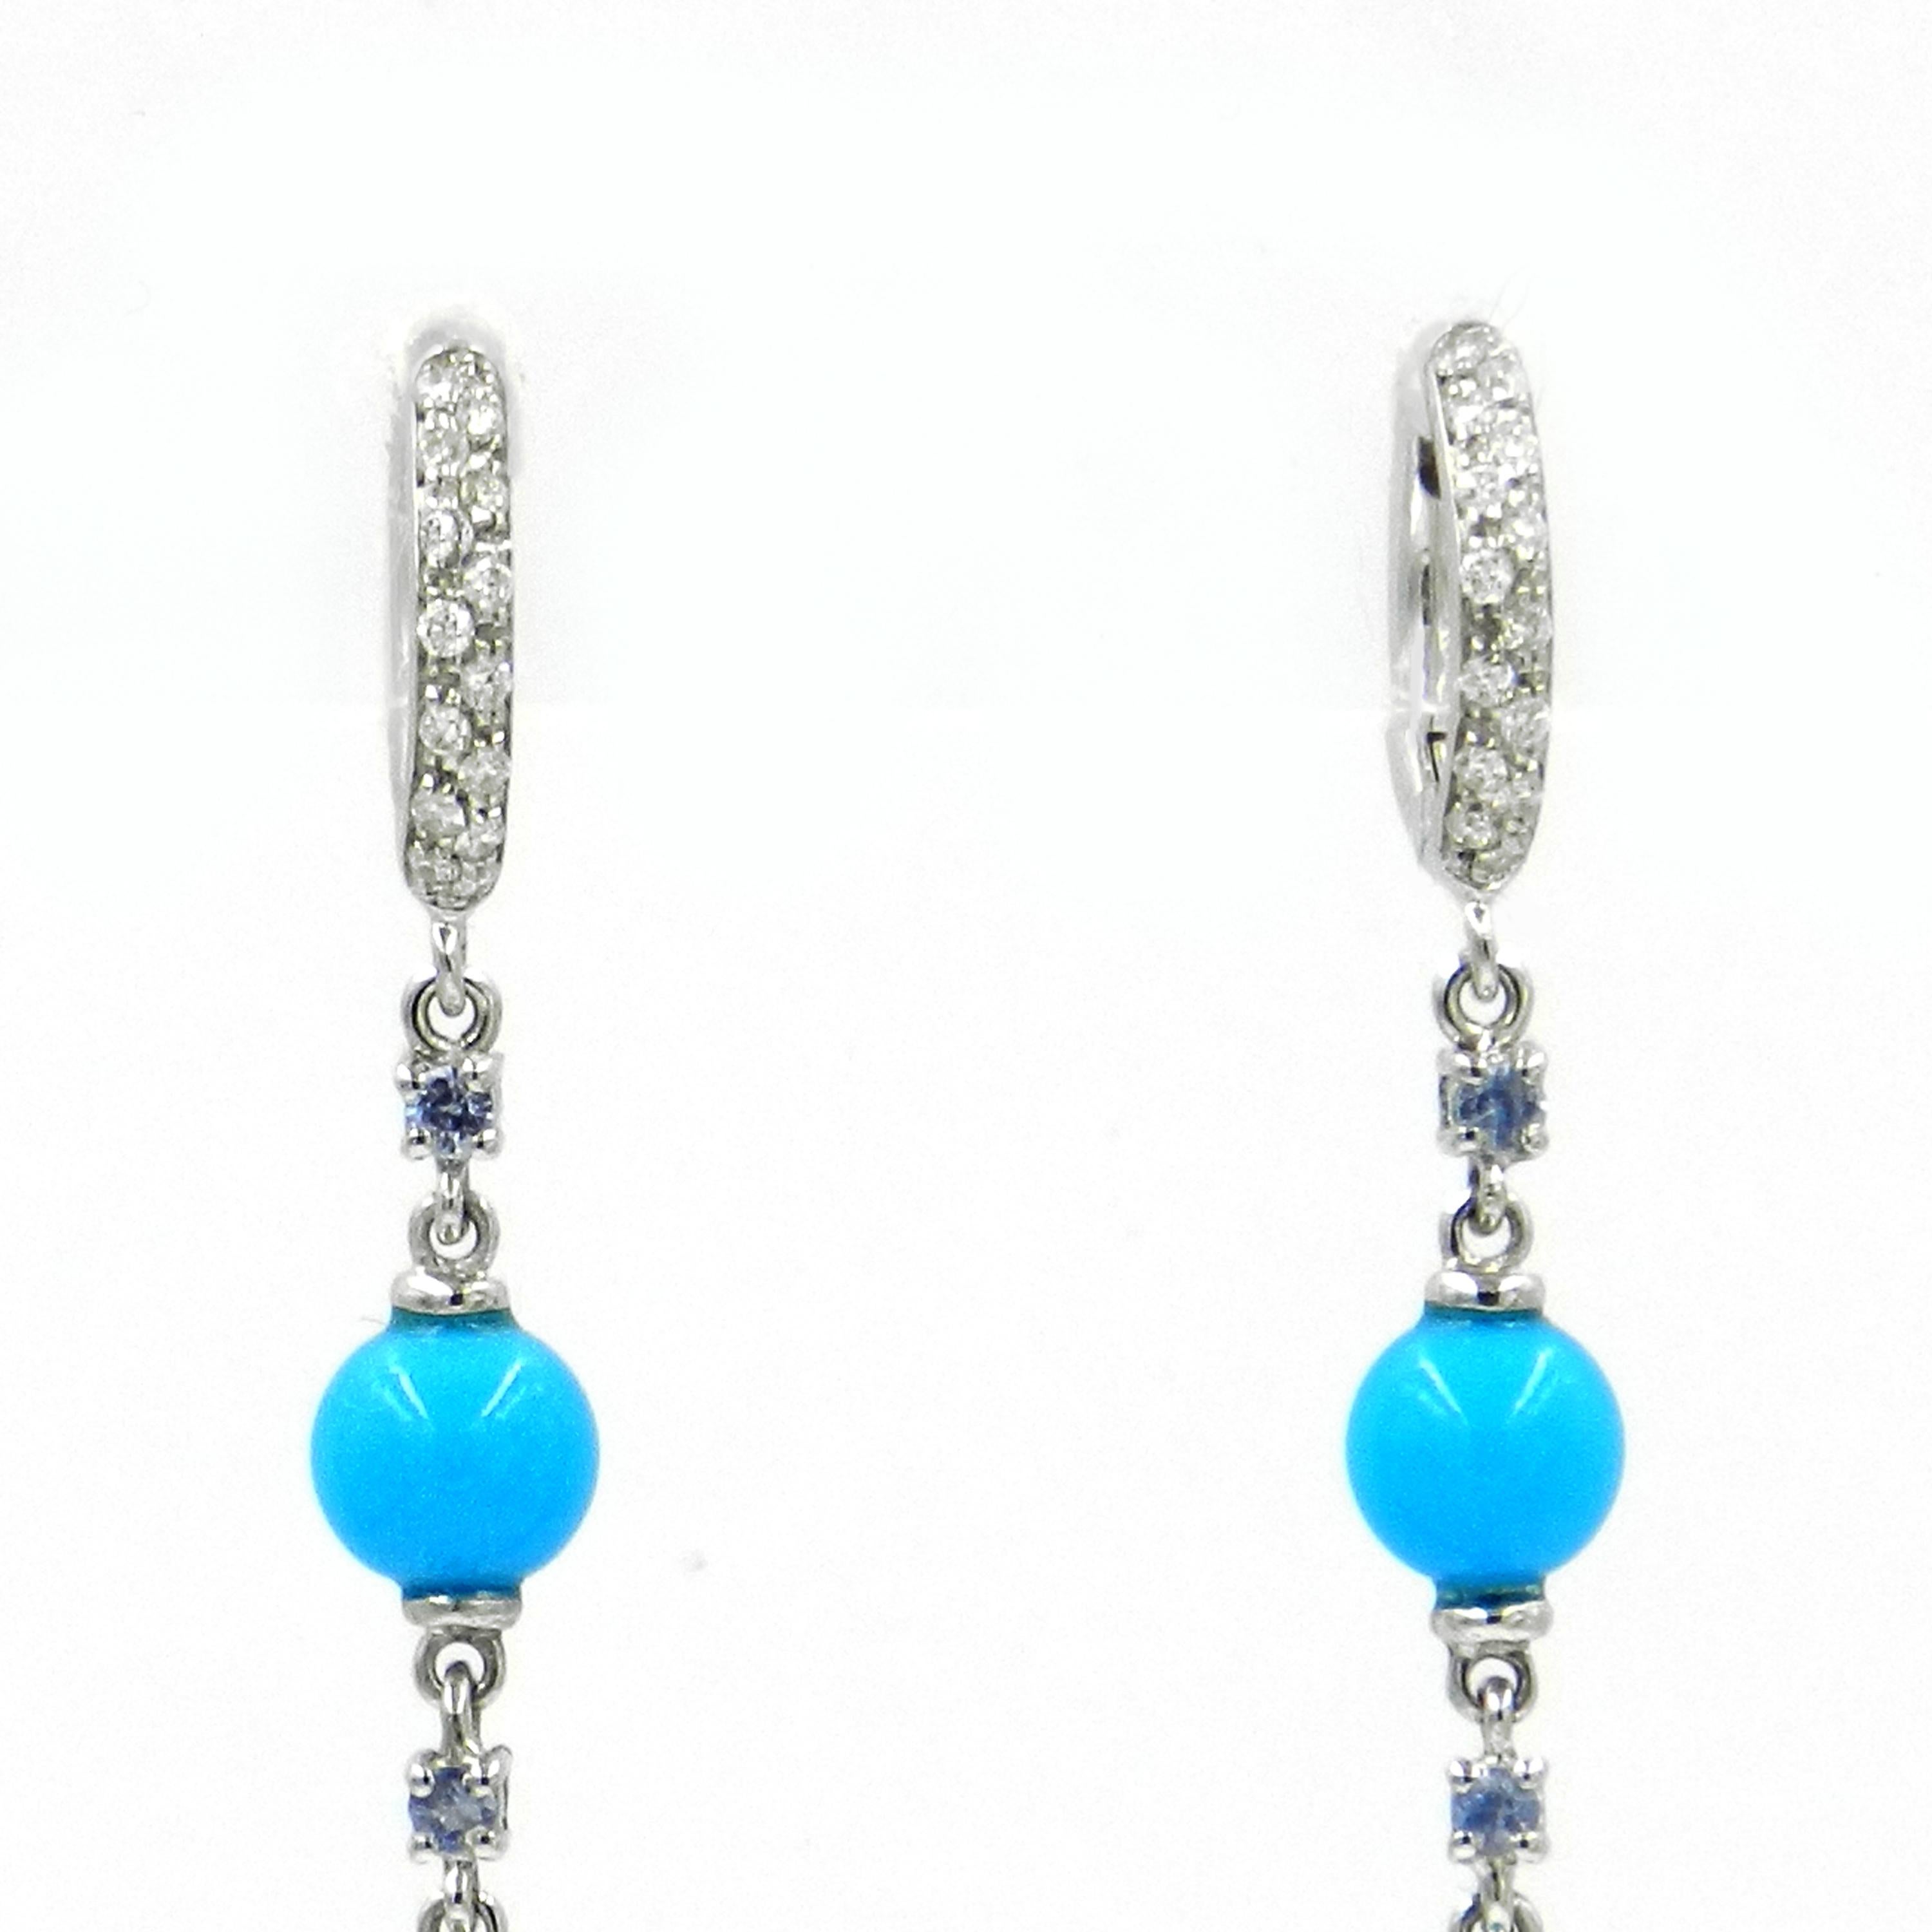 18KT White Gold  DIAMONDS, BLUE SAPPHIRES and TURQUOISE GARAVELLI LONG EARRINGS 
Total lenght cm 10
18kt GOLD gr  : 5,90
WHITE DIAMONDS ct : 0,18
LIGHT BLUE SAPPHIRES  : 0,35
TURQUOISE total ct : 34,10